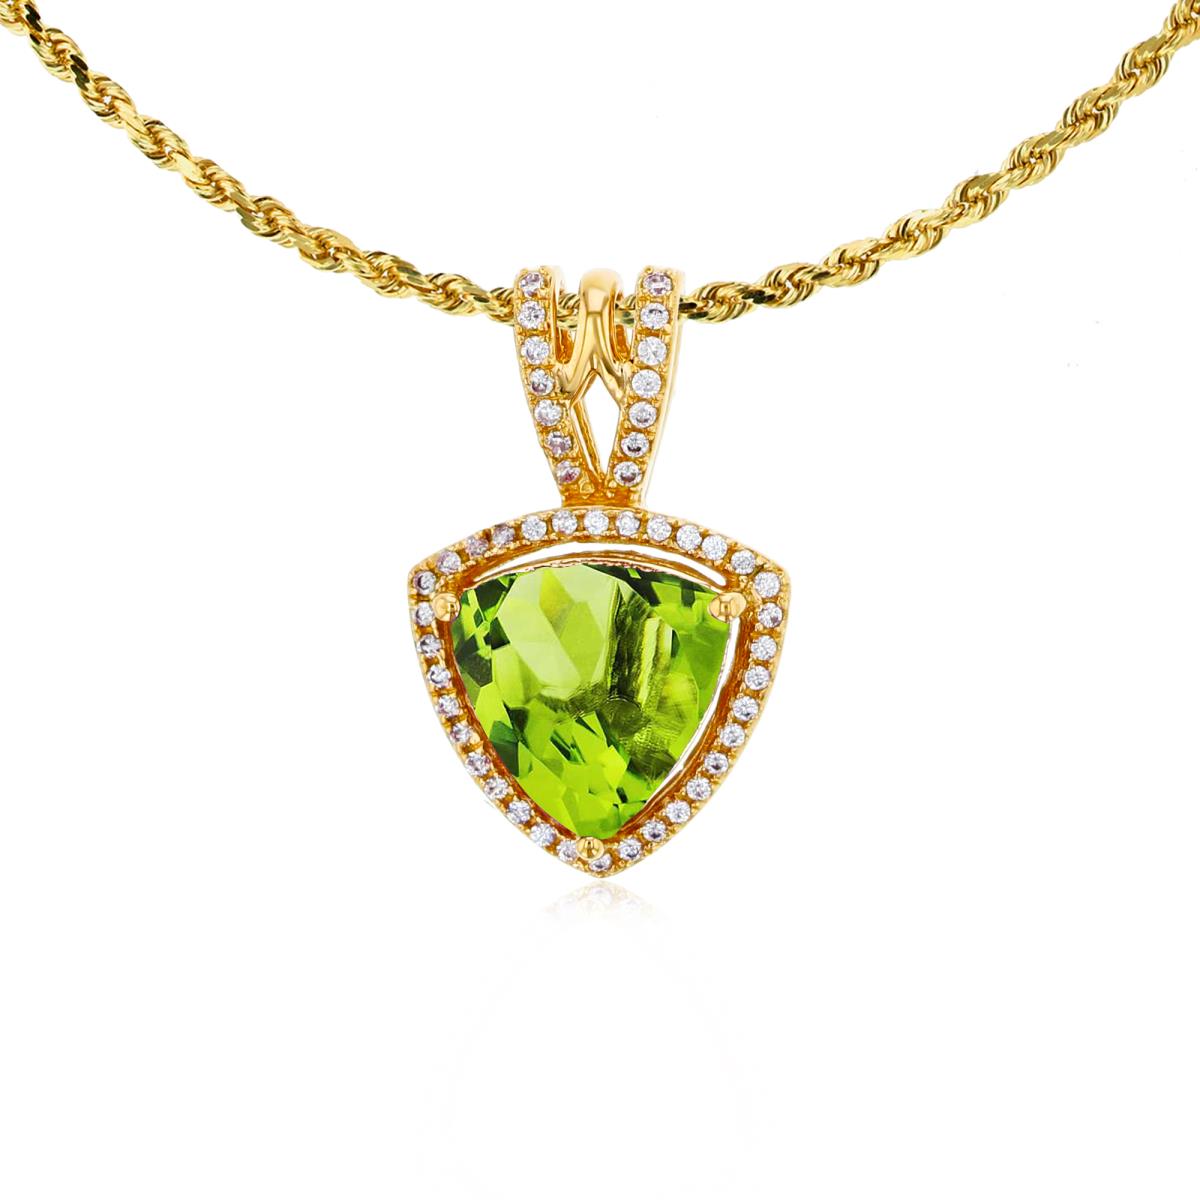 14K Yellow Gold 8mm Trillion Peridot & 0.13 CTTW Diamonds Frame 18" Rope Chain Necklace